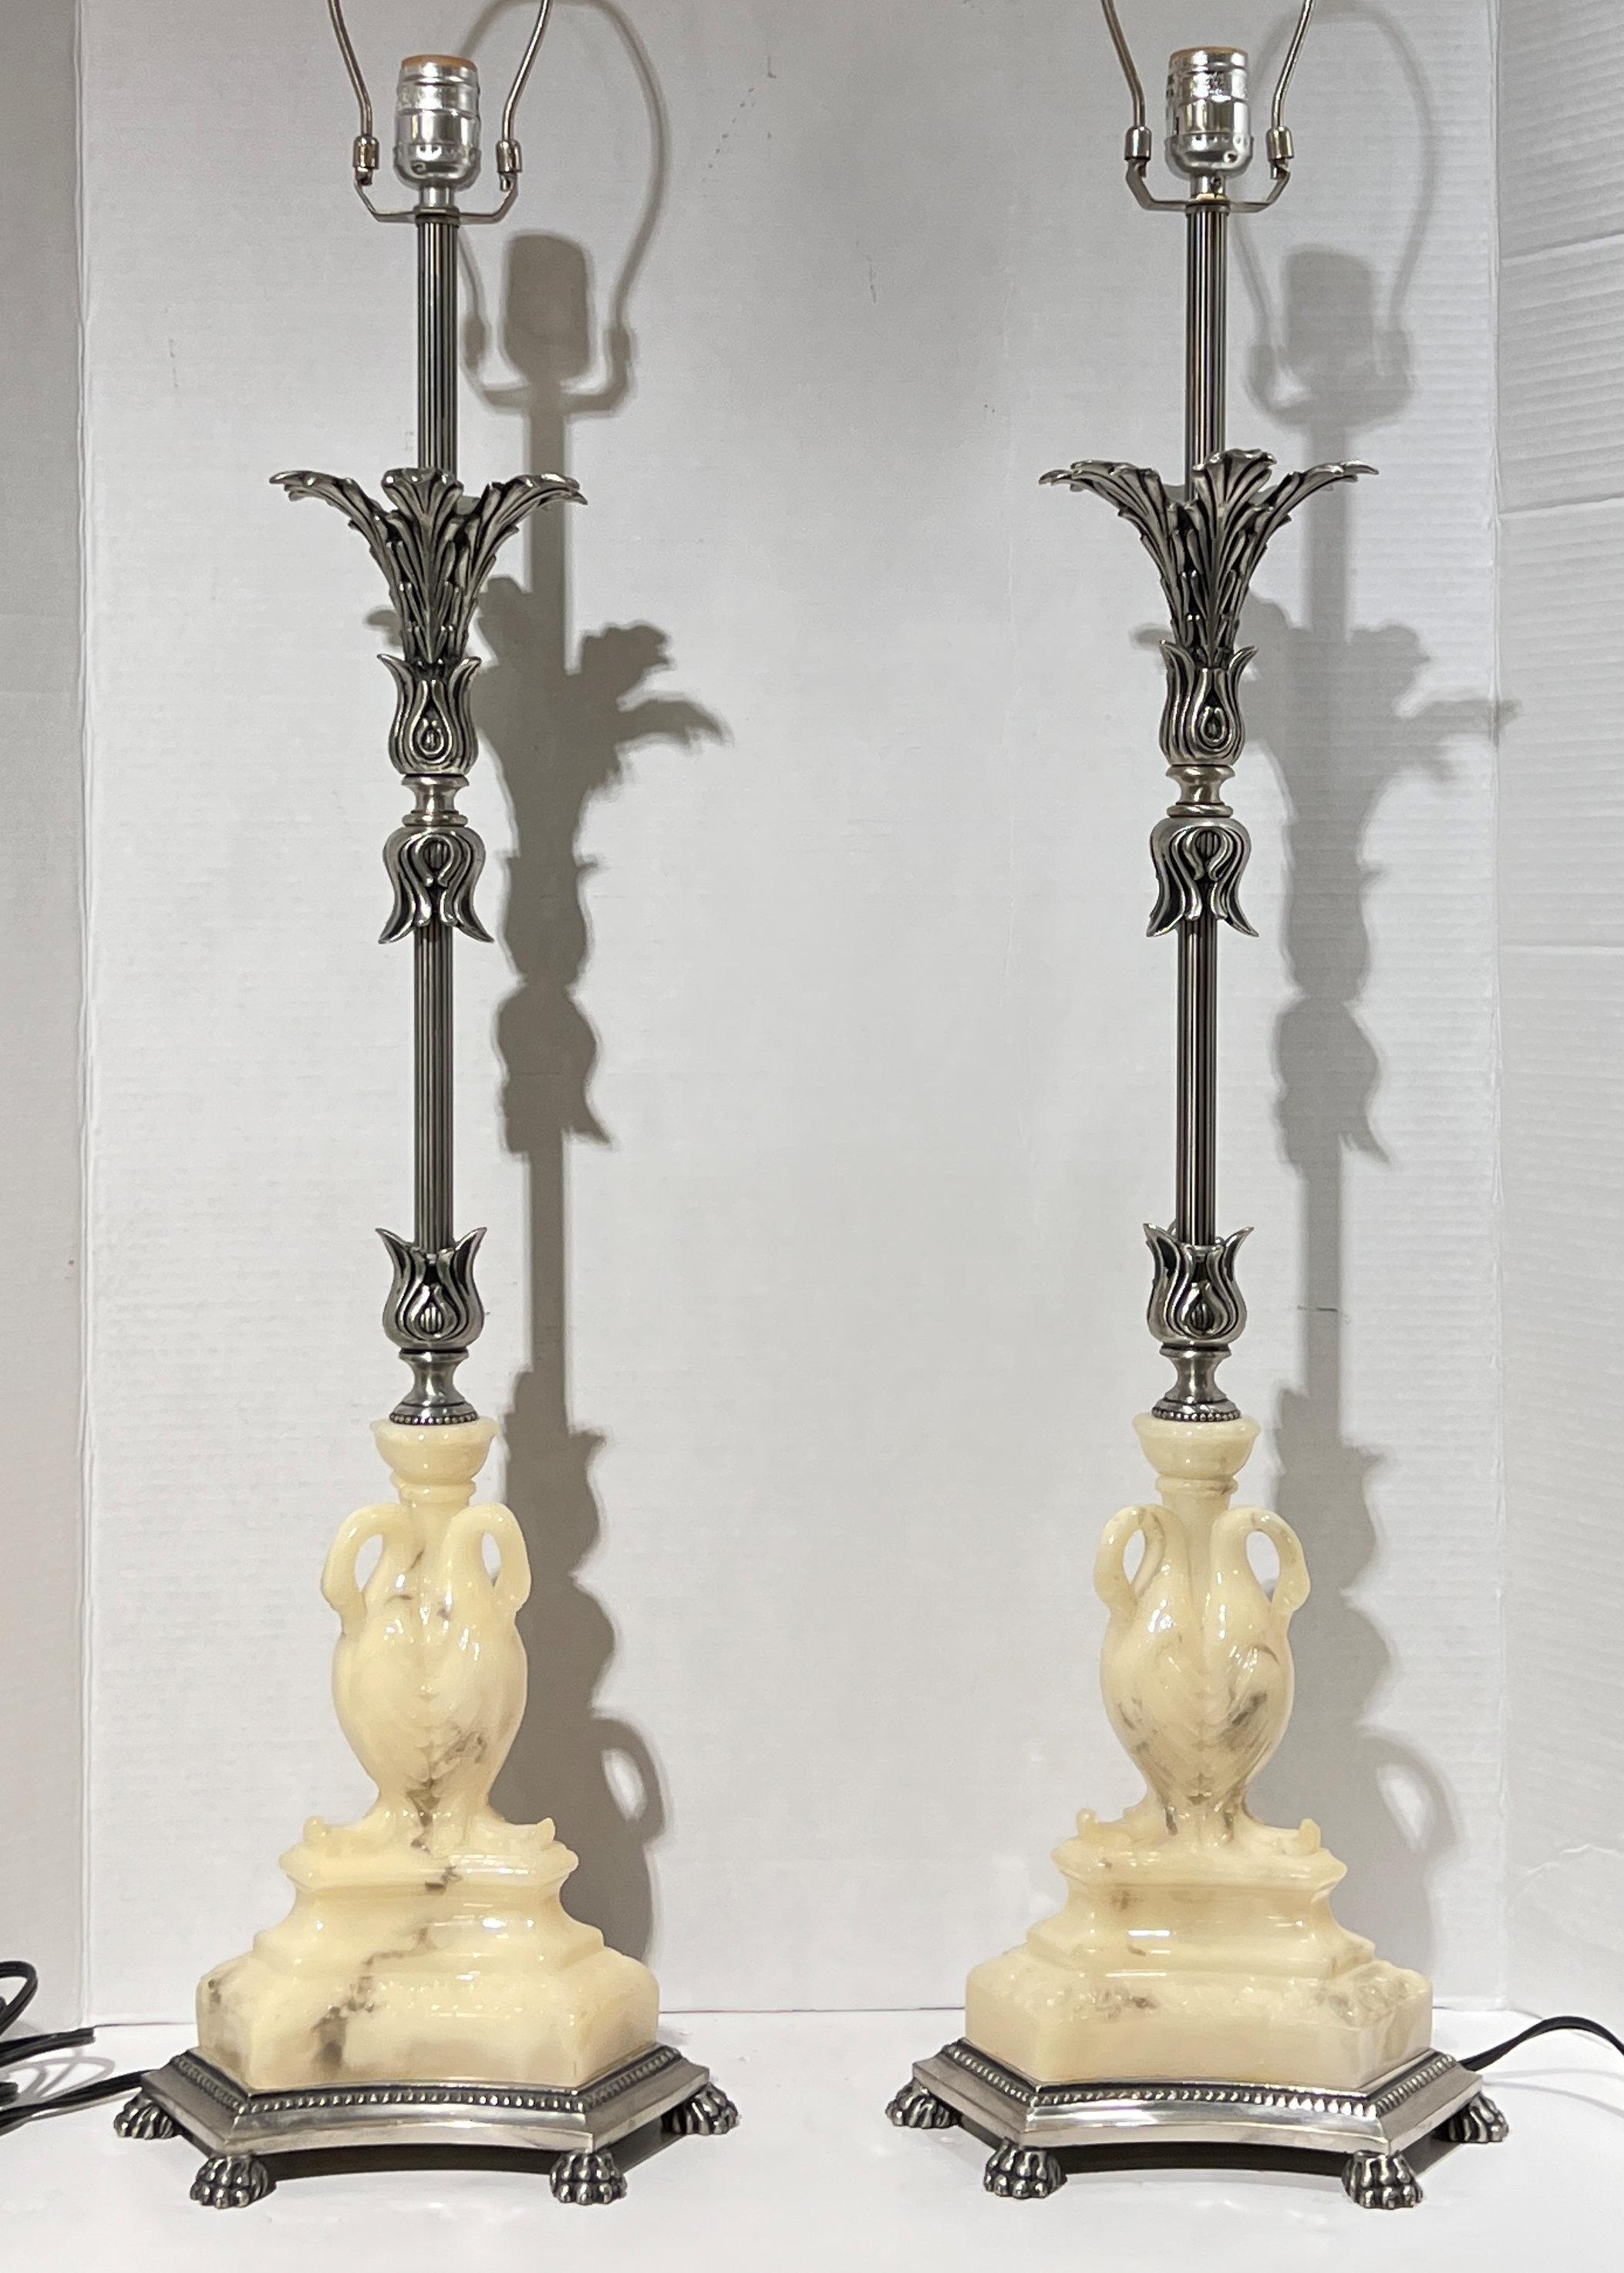 Pair of vintage silvered metal table lamps in the neoclassical style with molded composition  figures of swans.  Each in excellent condition.